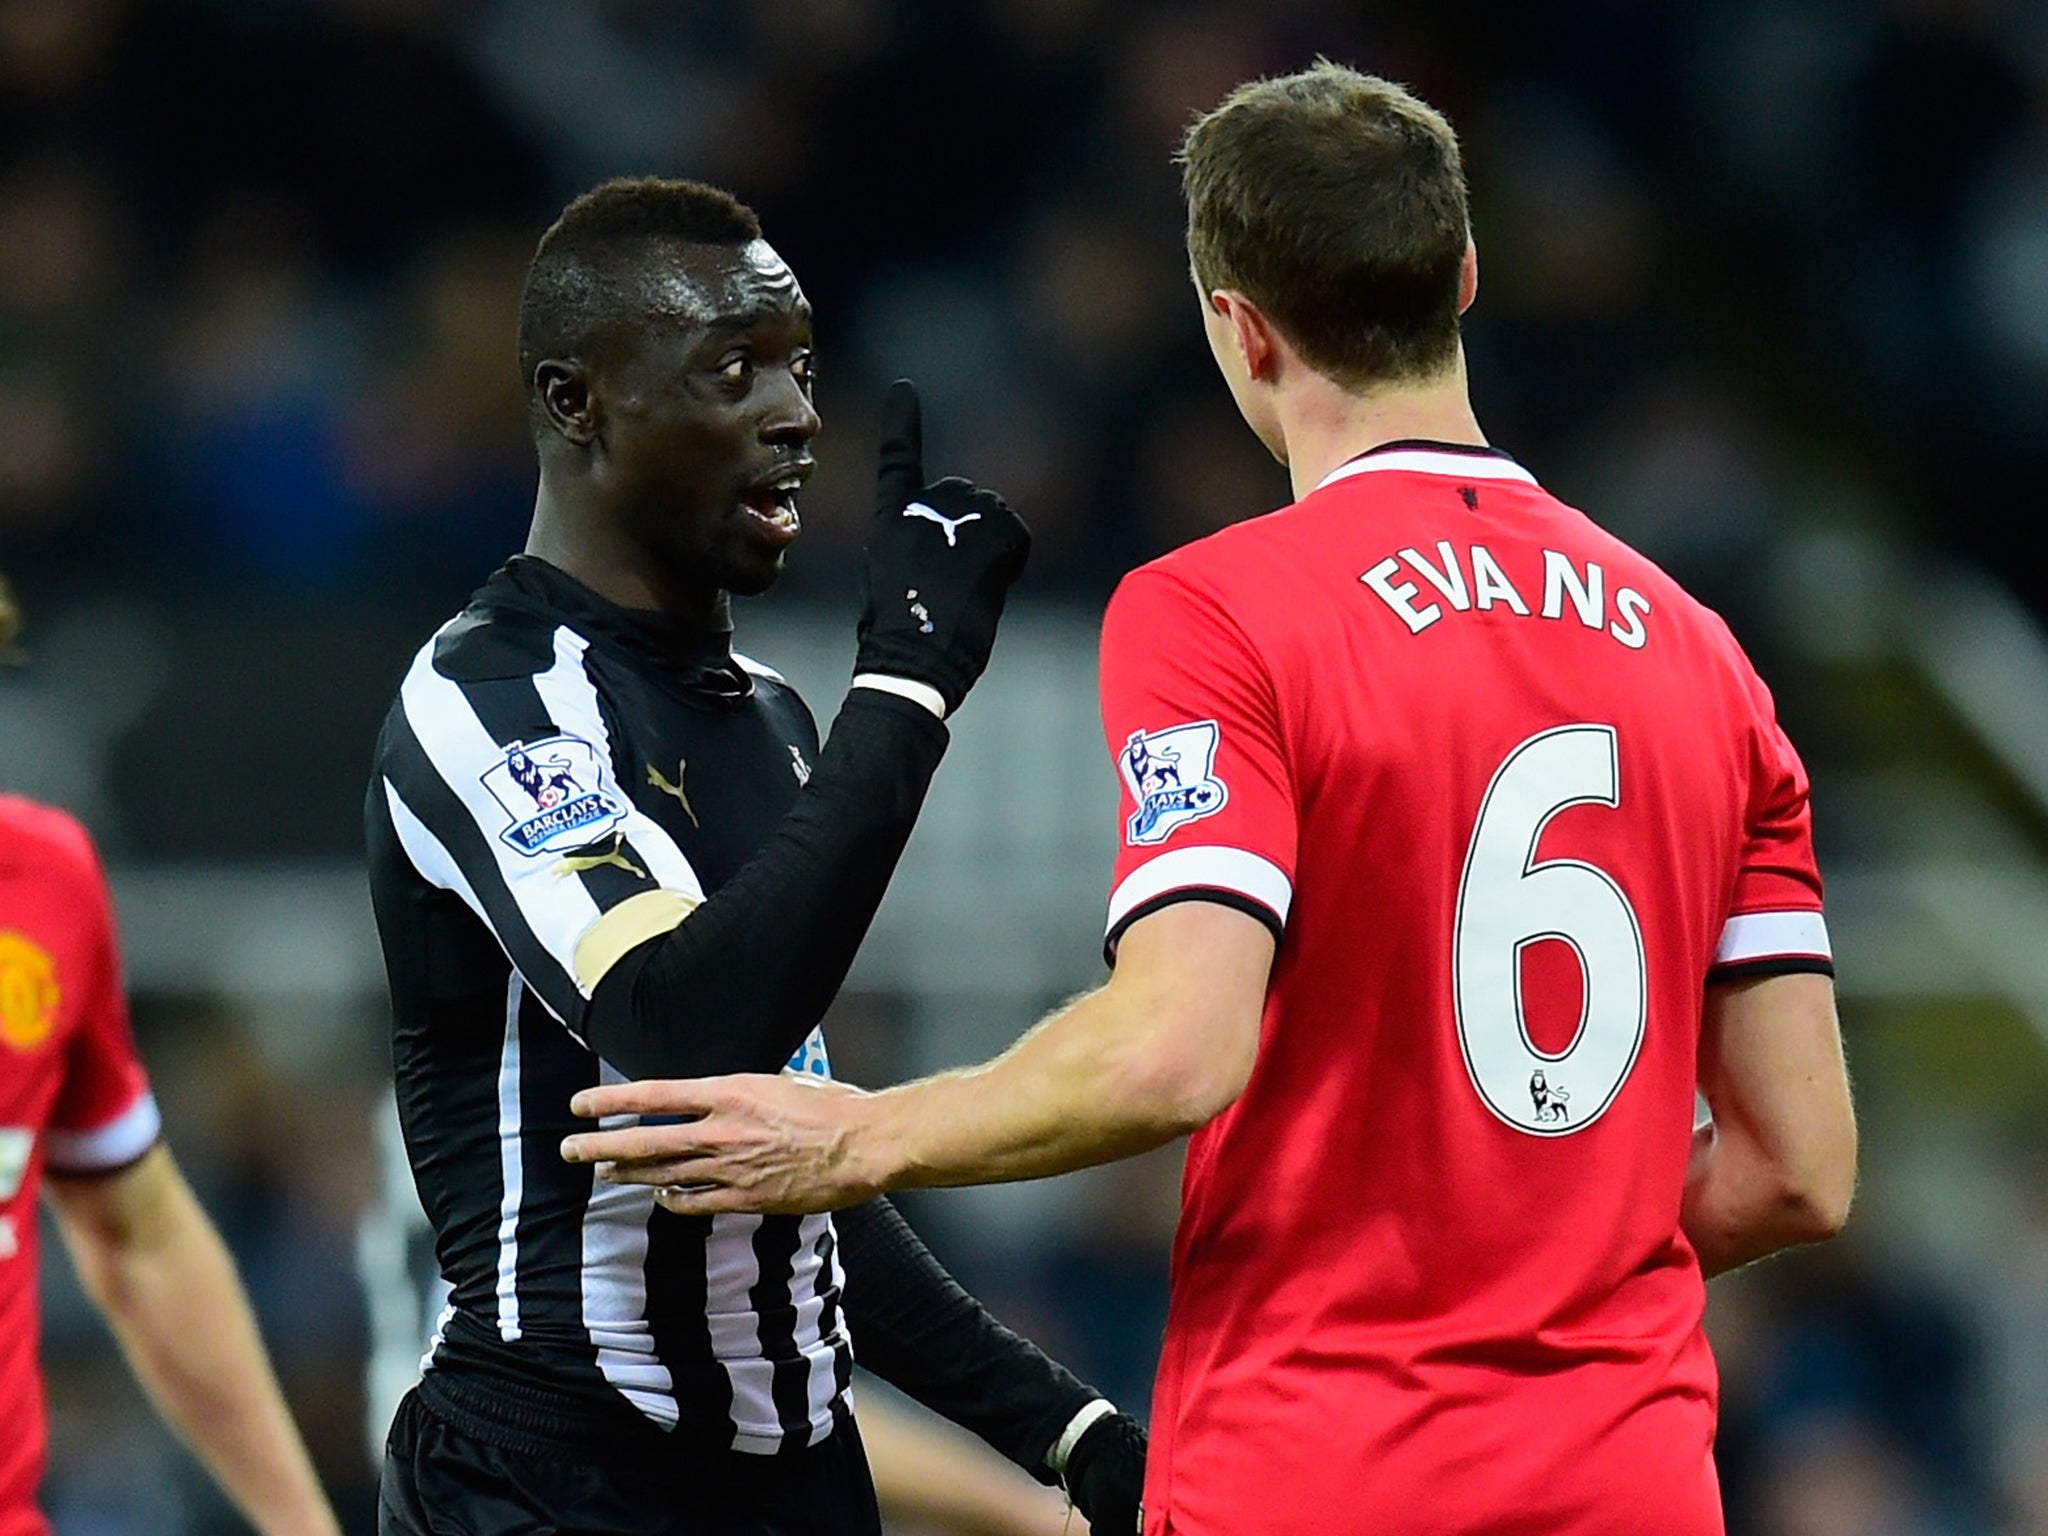 Johnny Evans and Papiss Cisse come together